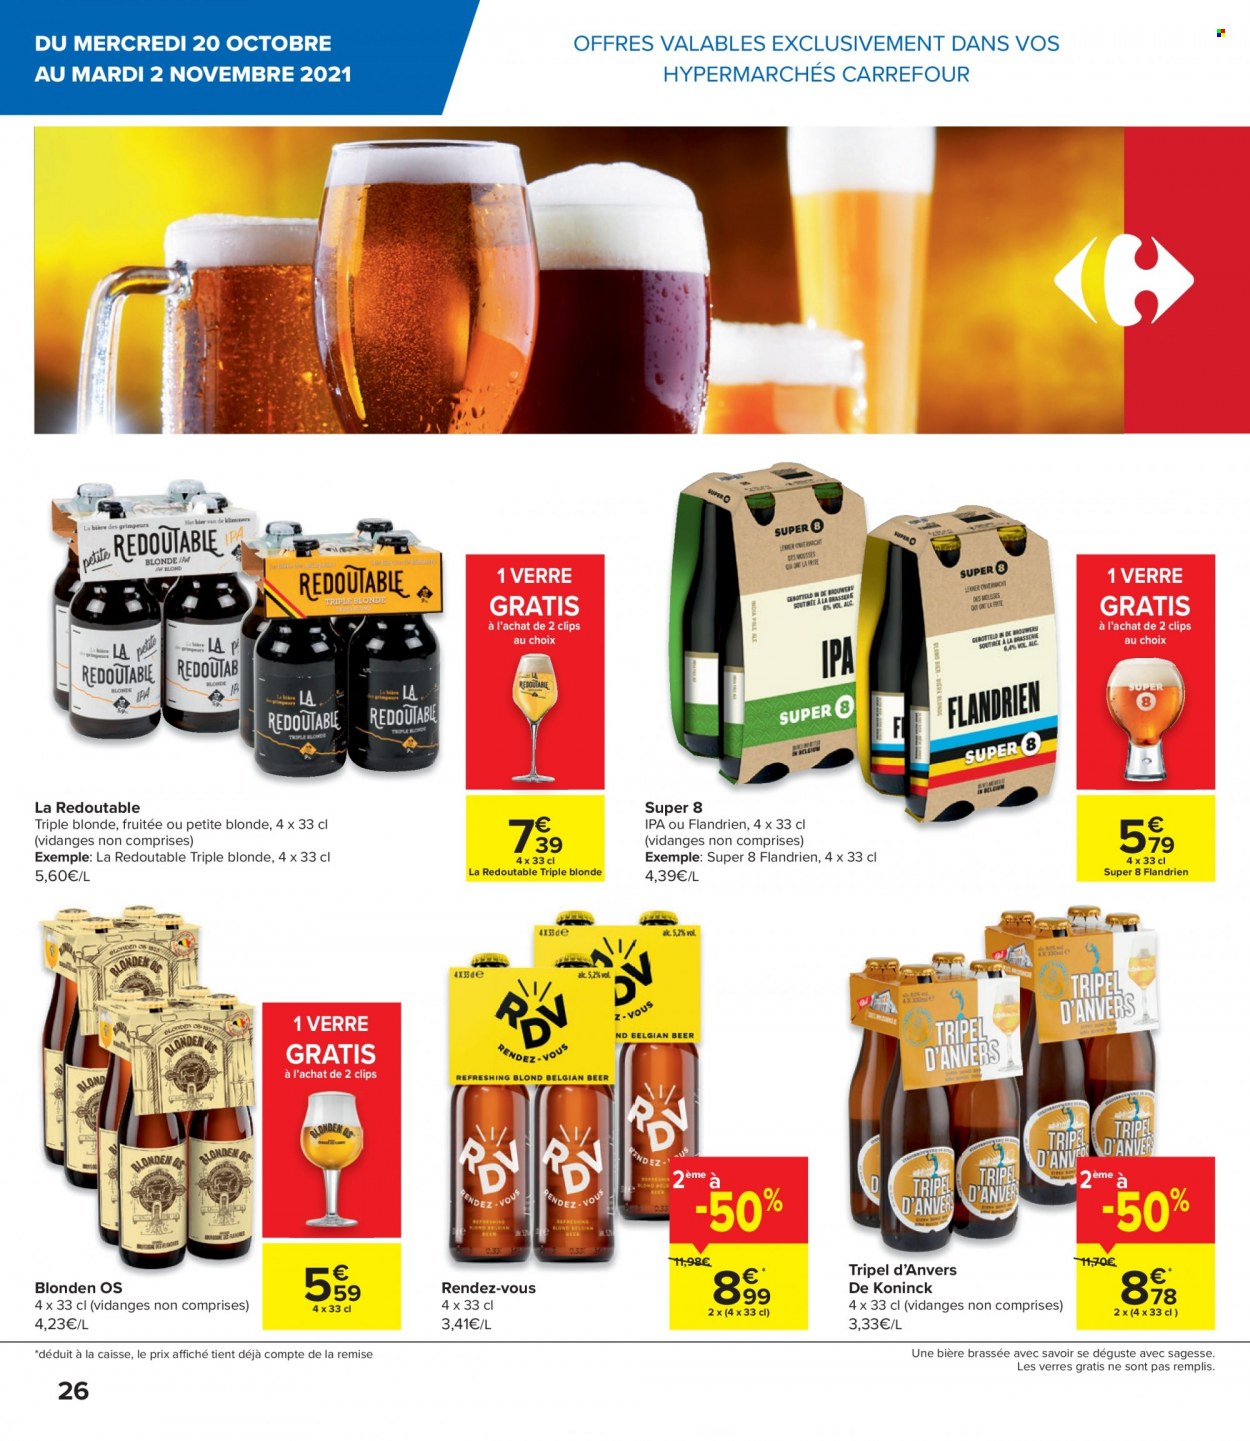 Catalogue Carrefour hypermarkt - 20.10.2021 - 2.11.2021. Page 2.